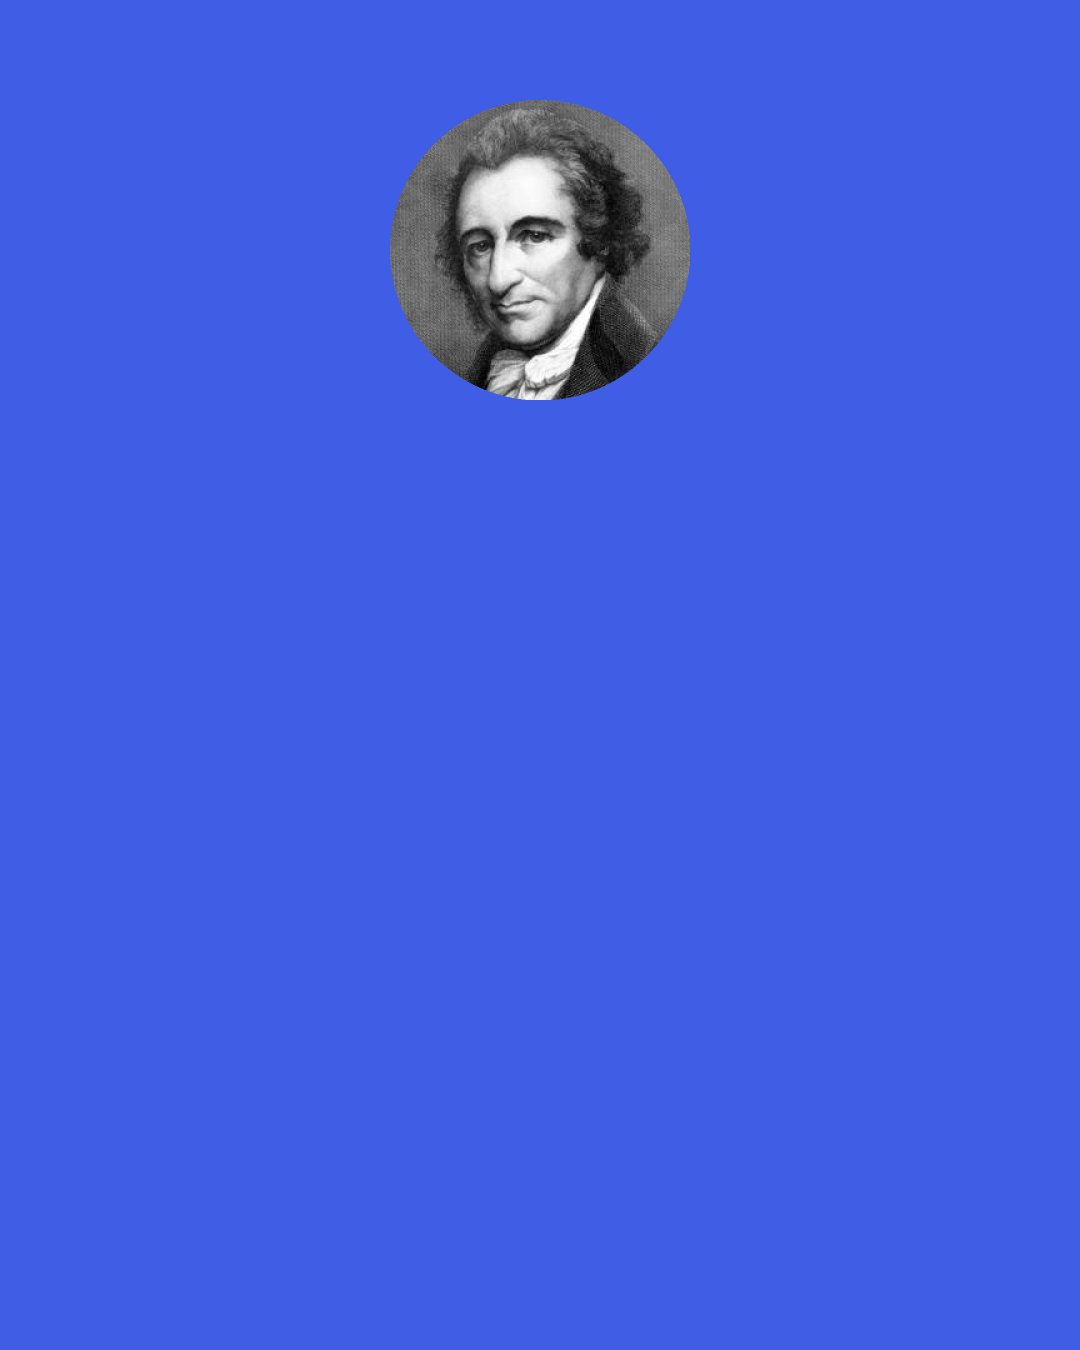 Thomas Paine: For the fate of Charles the first, hath only made kings more subtle — not more just.